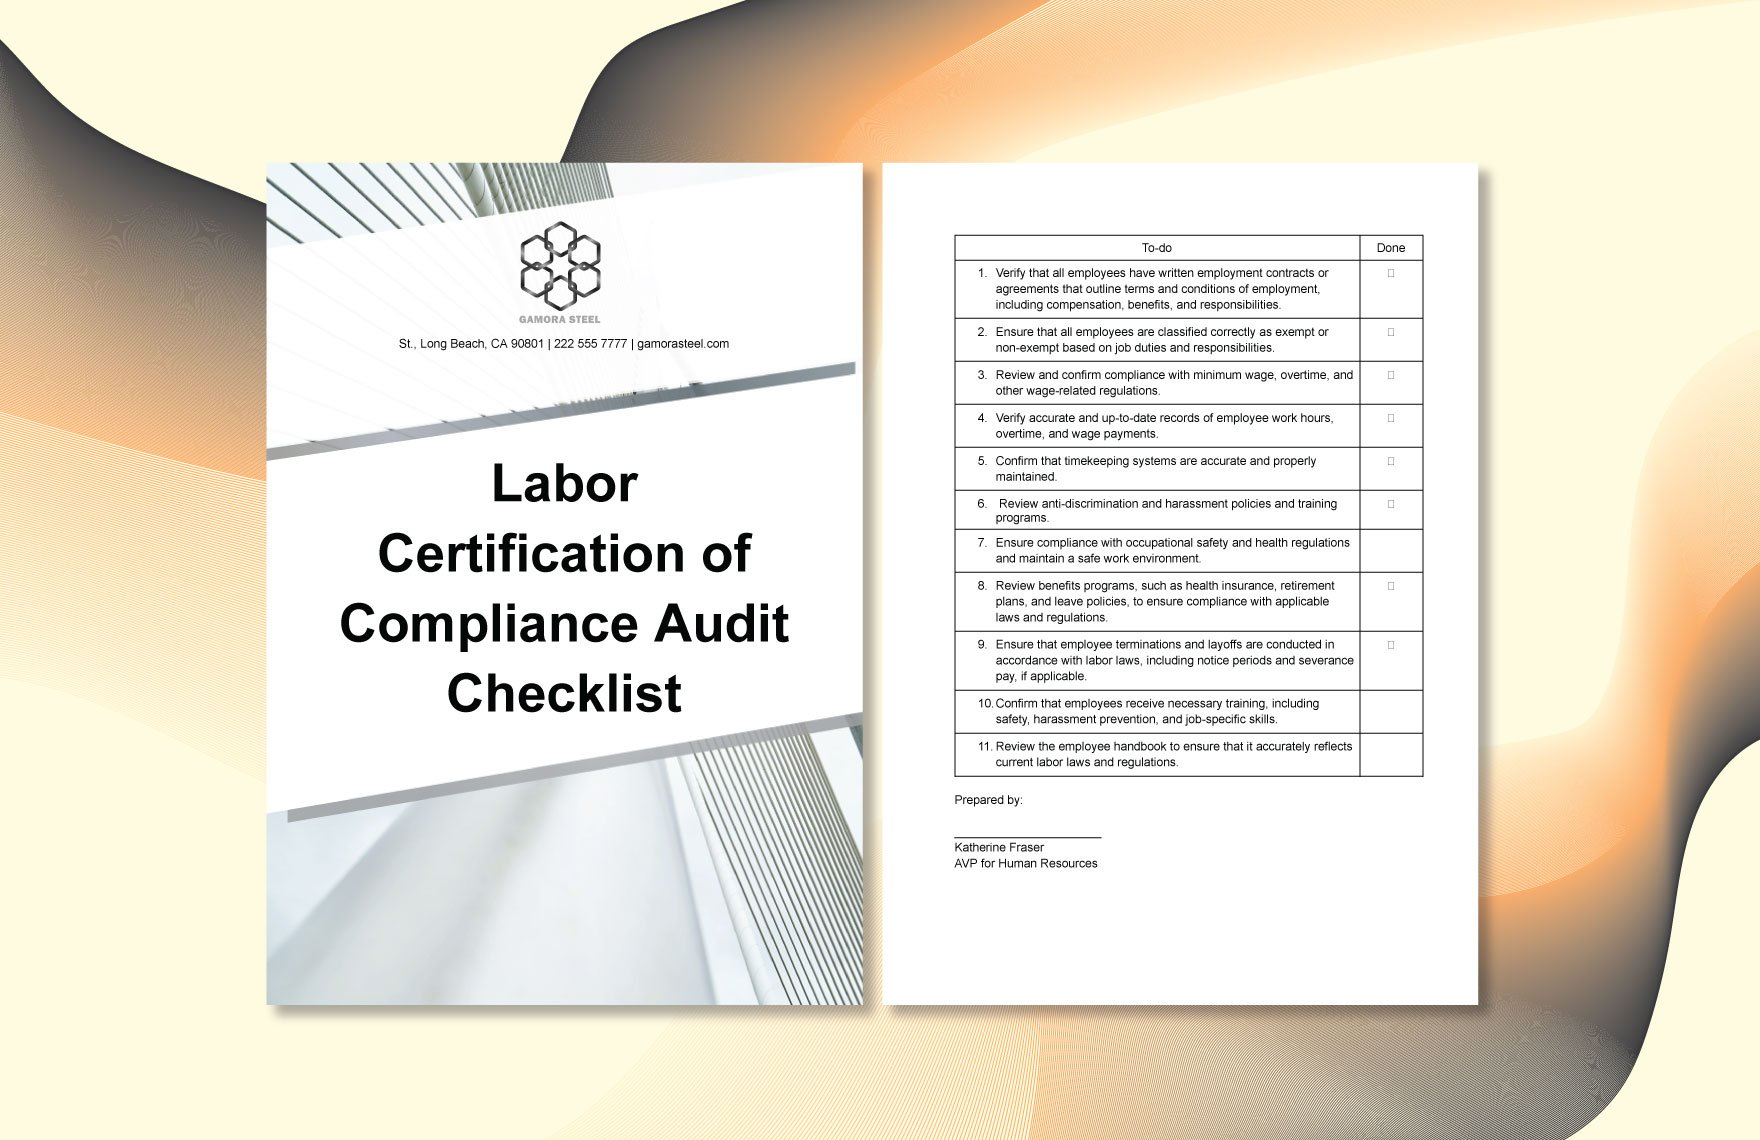 Certification of Compliance Audit Checklist Template